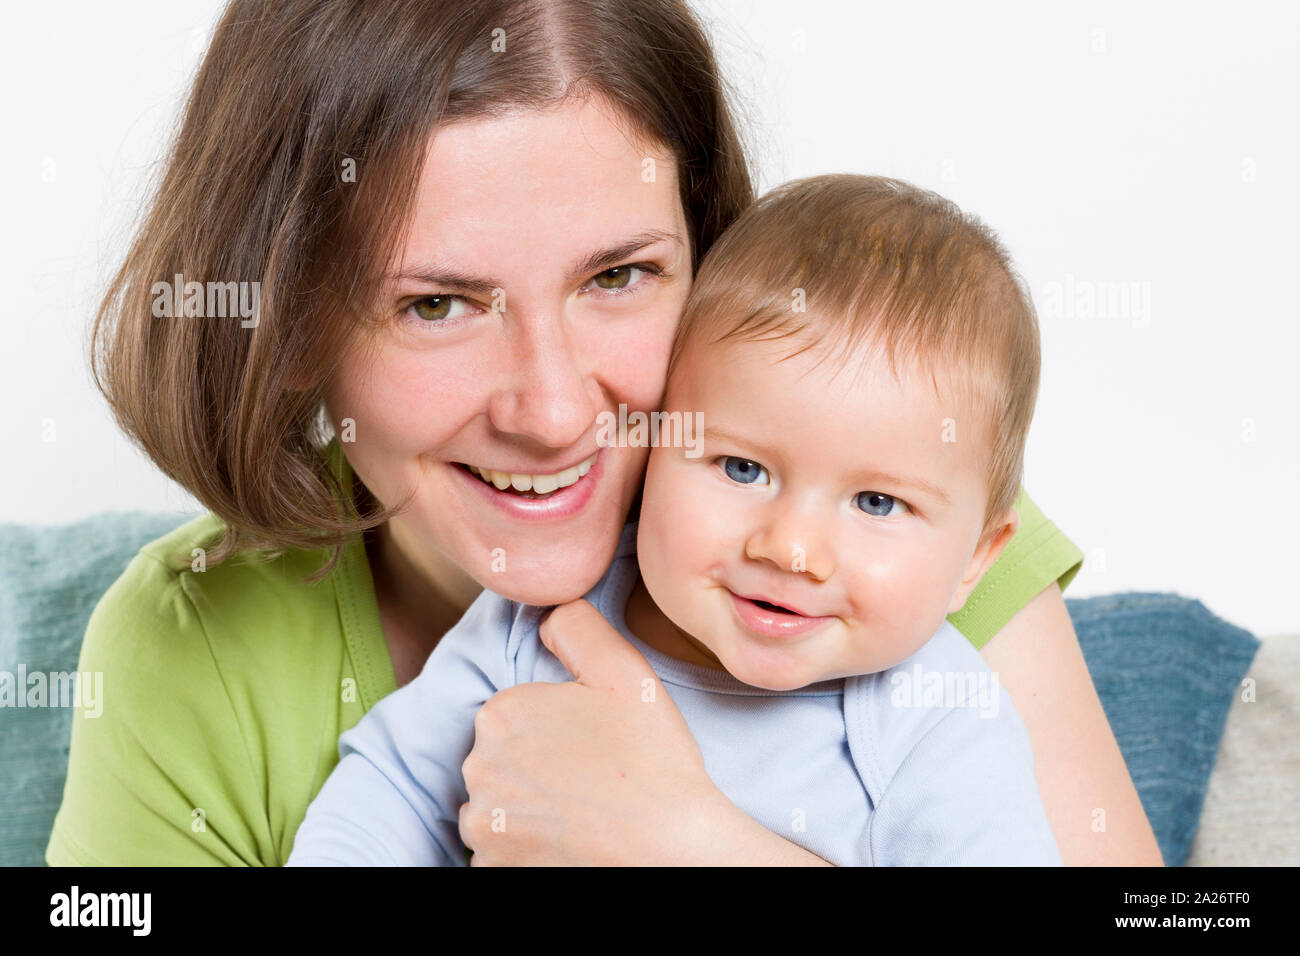 Smiling mother hugging her adorable baby boy. Stock Photo